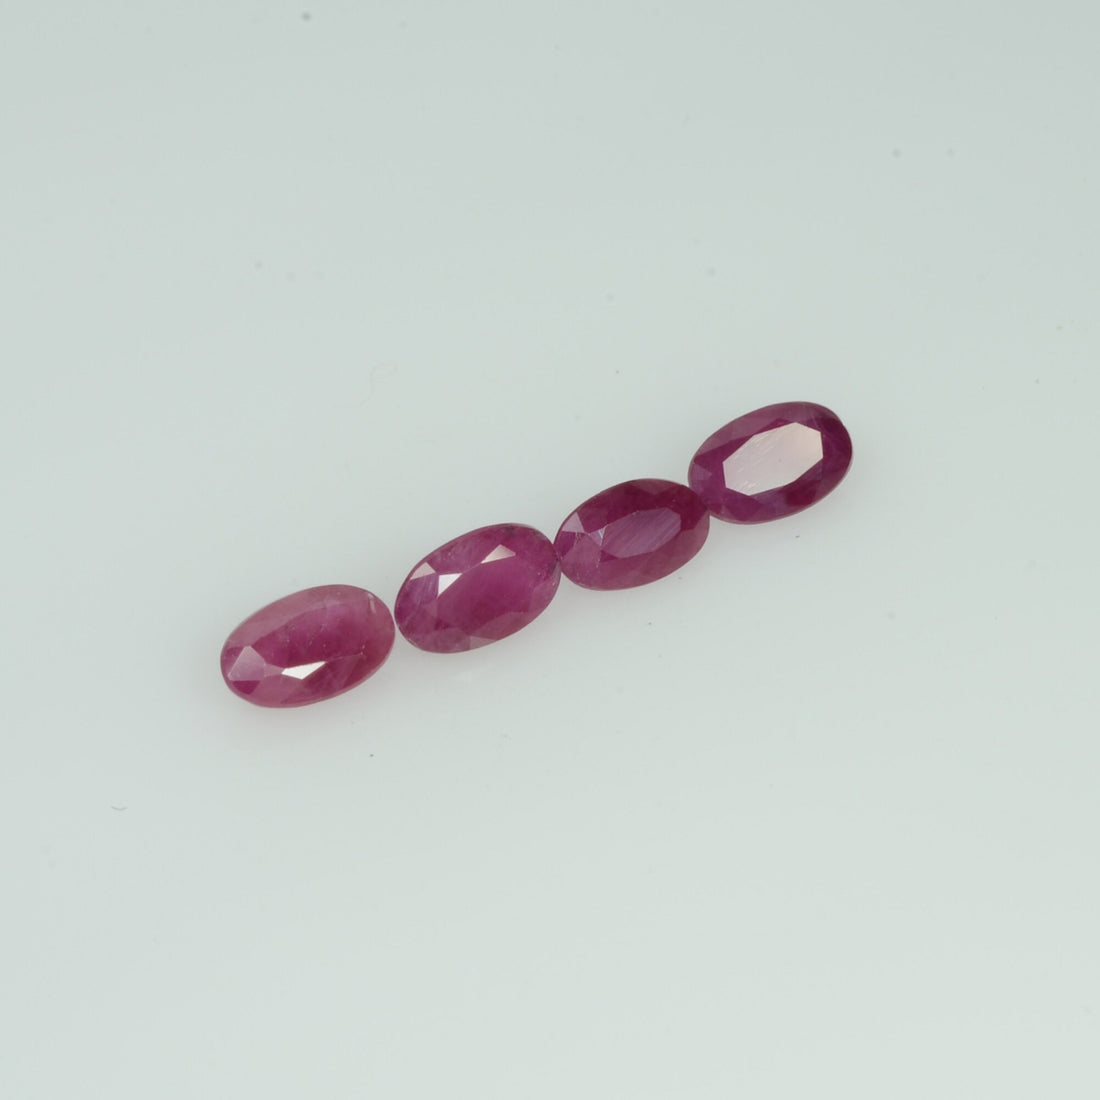 5x3 mm Lot Natural Ruby Loose Gemstone Oval Cut